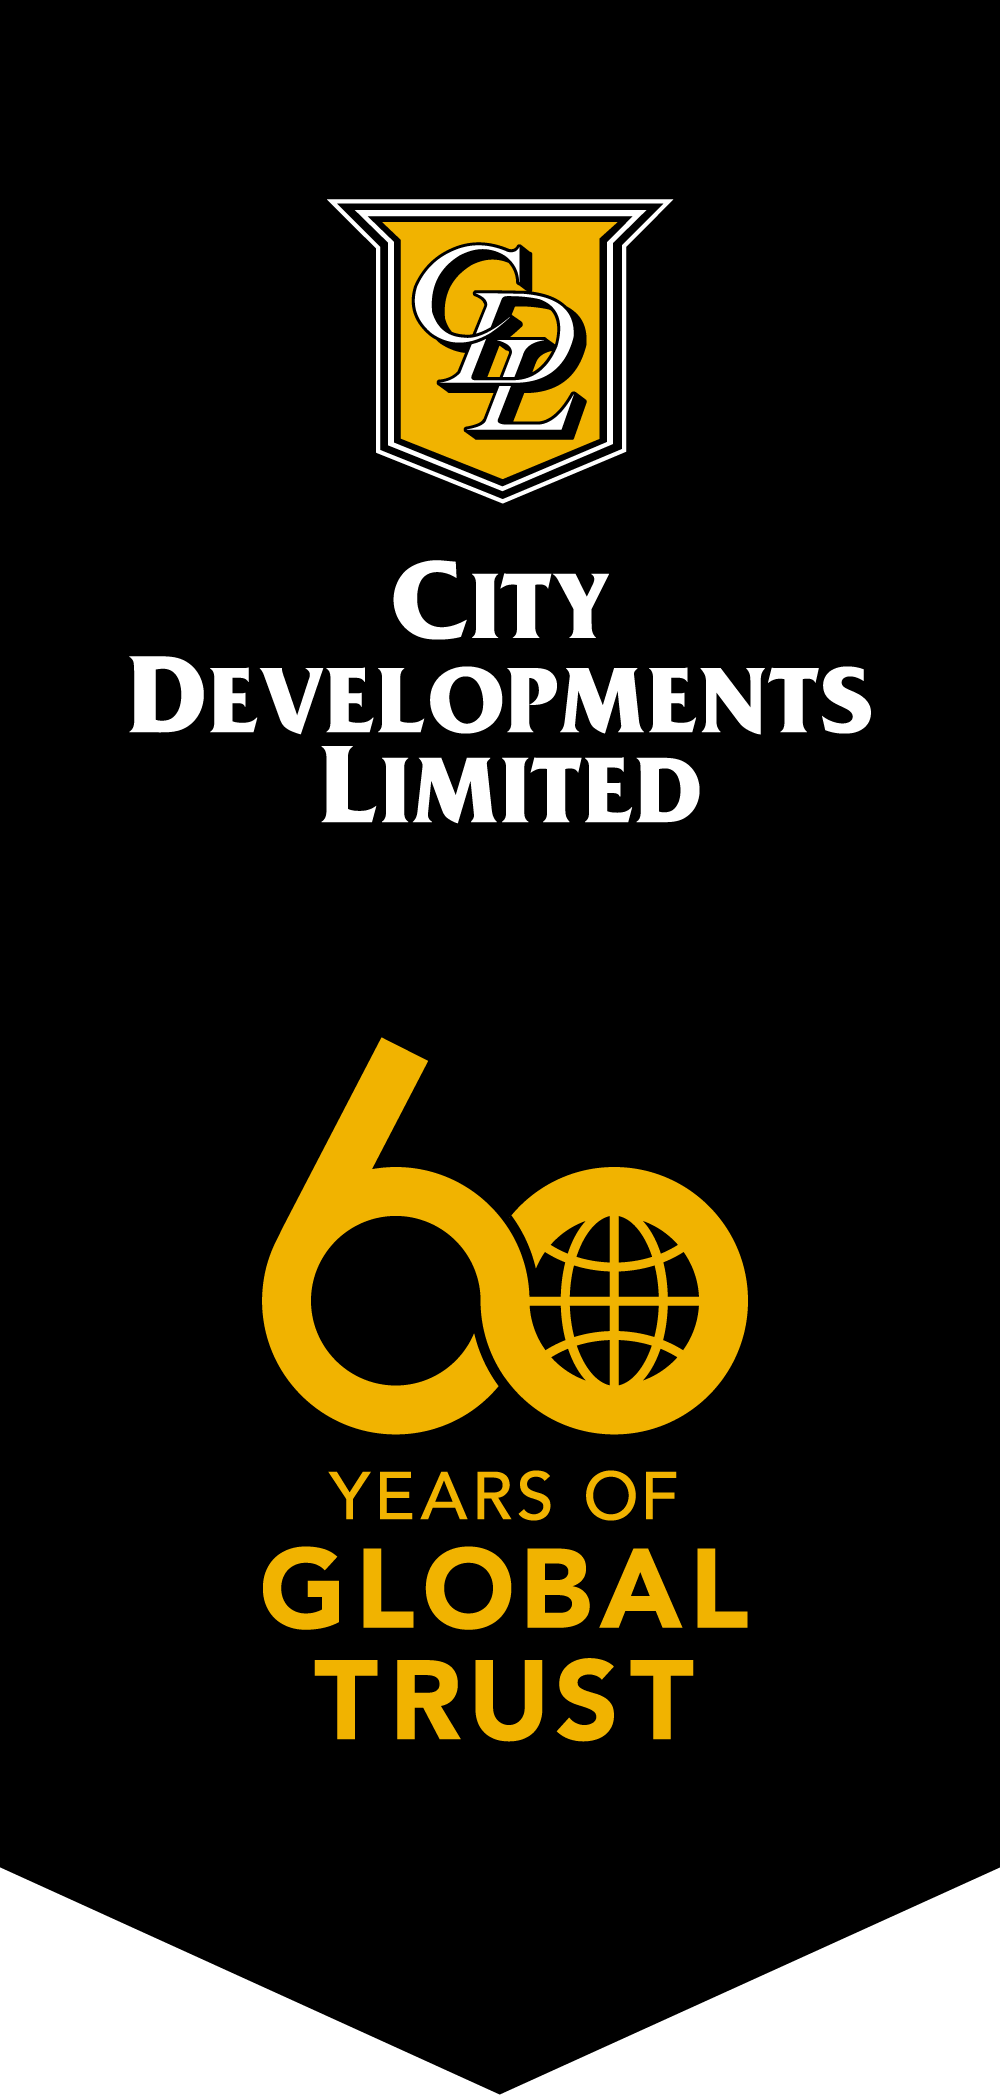 City Developments Limited (CDL), a leading global real estate company